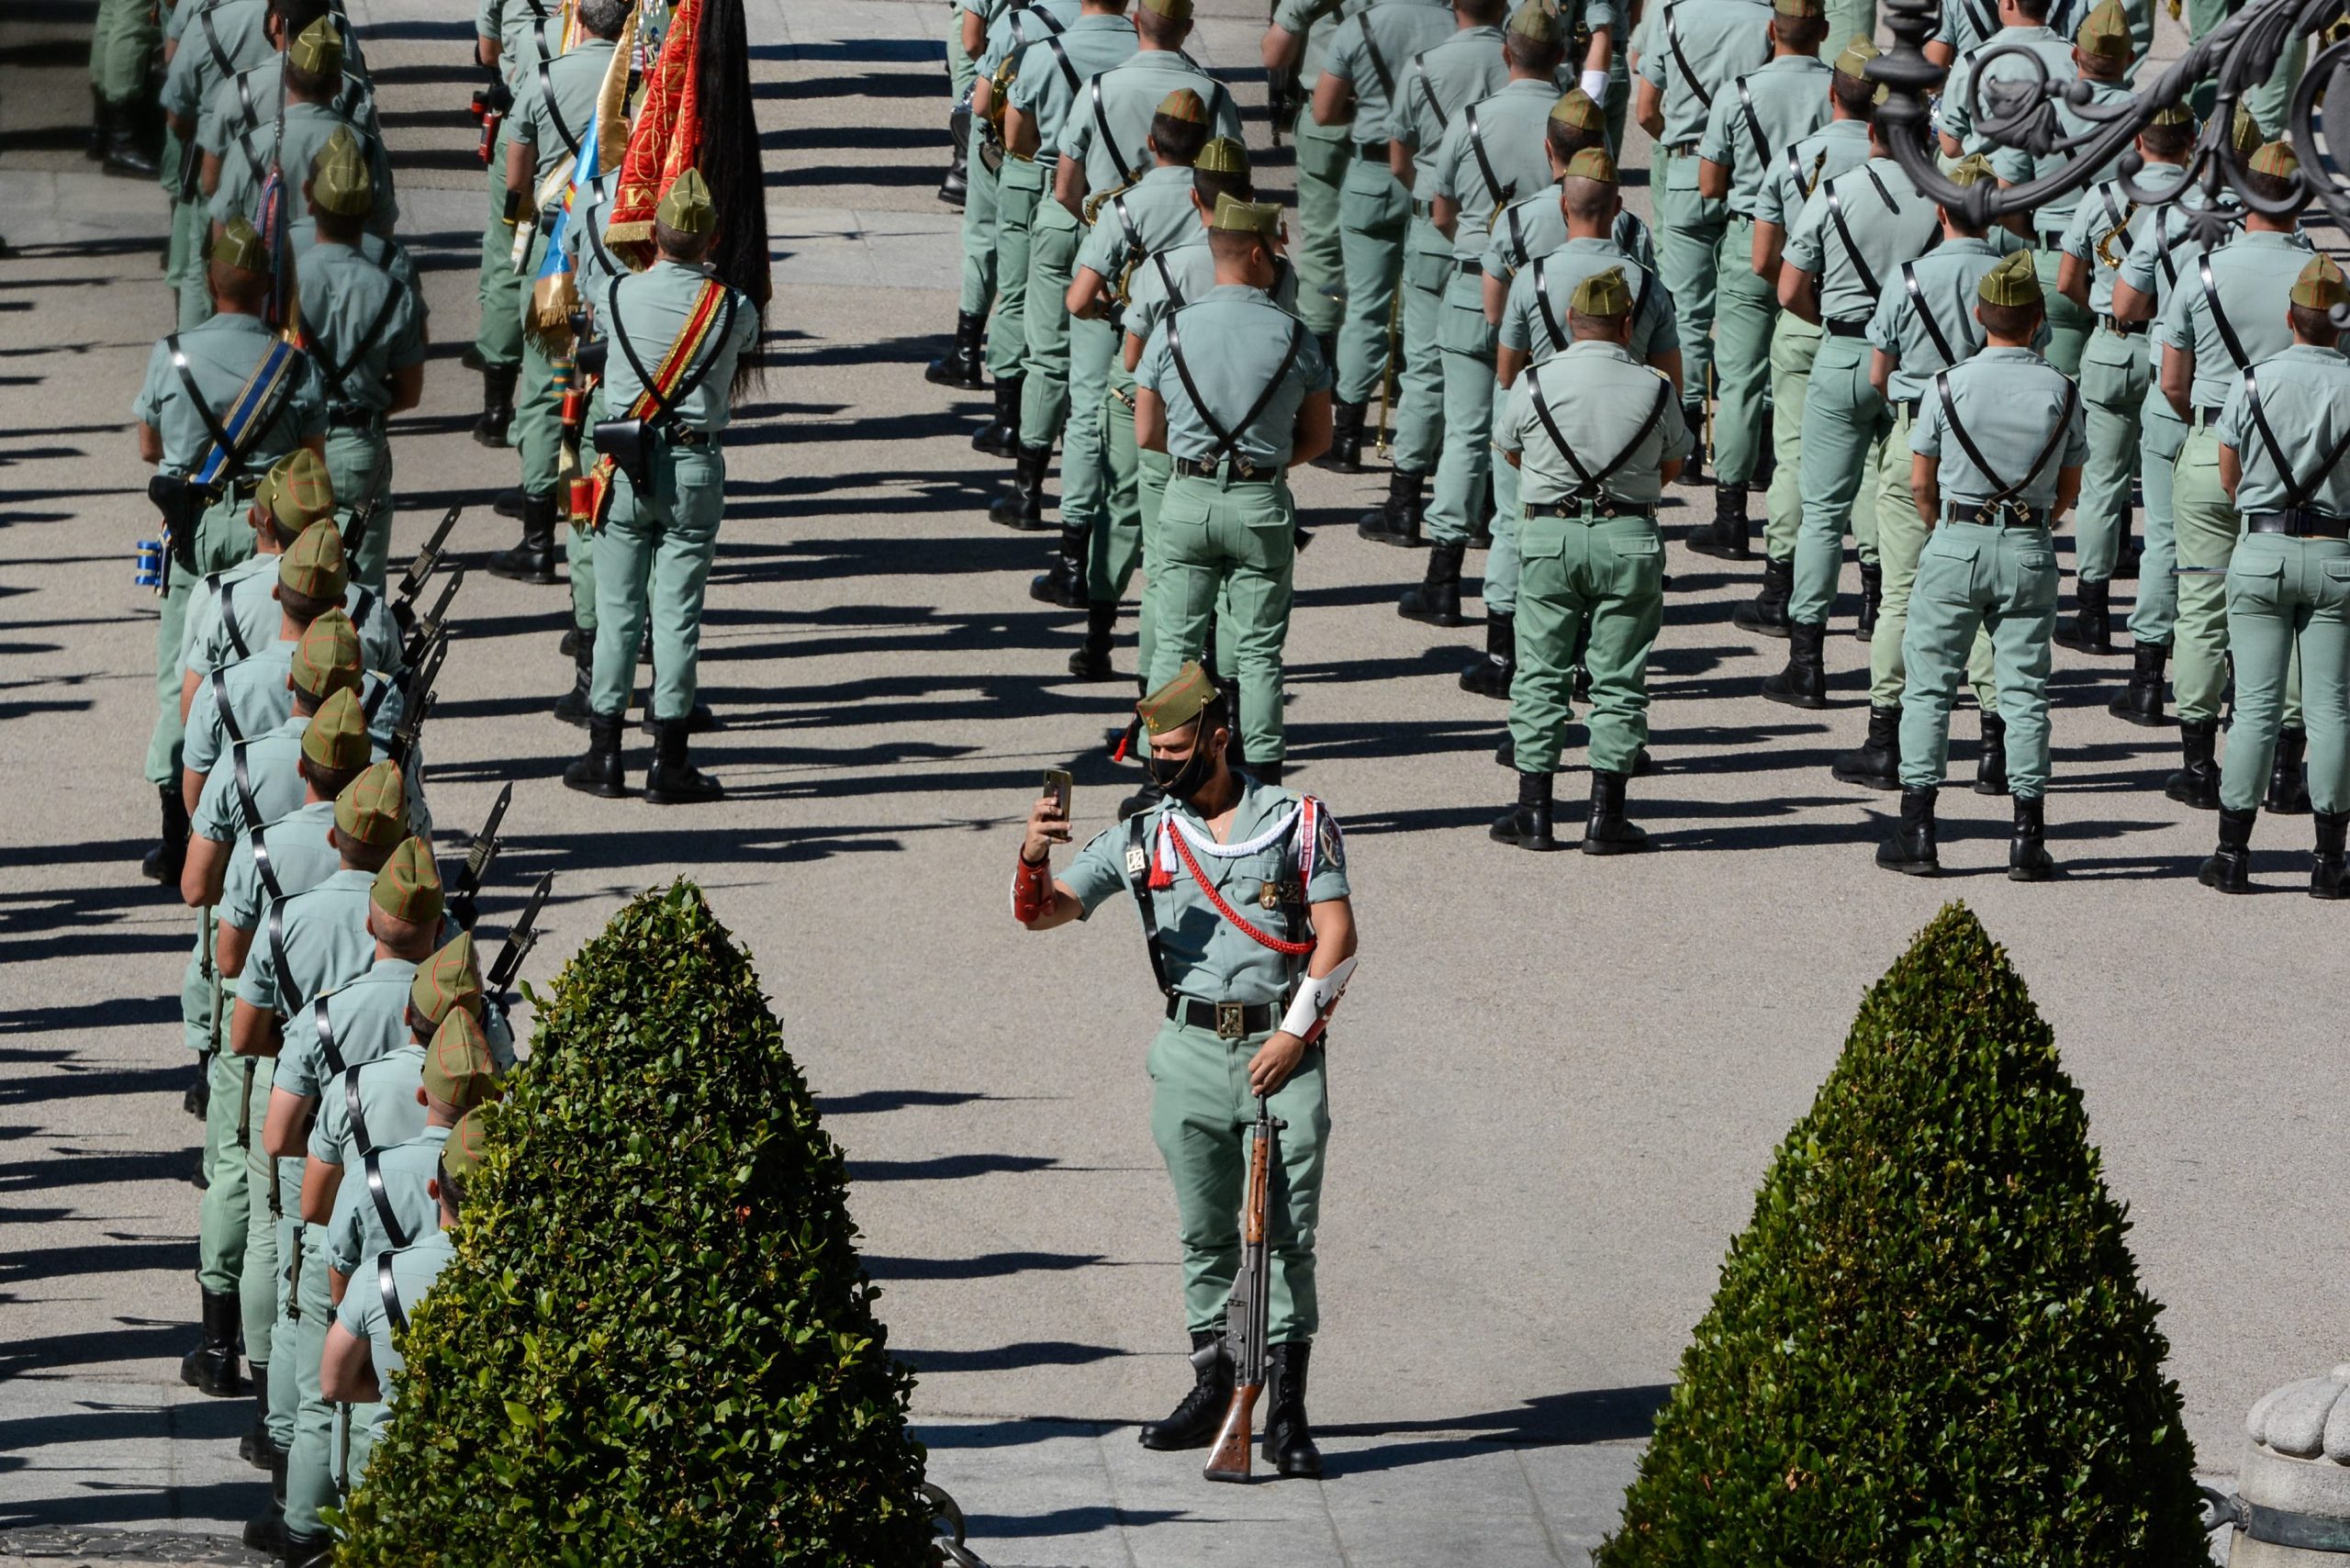 Military Parade For Hispanic Holiday In Madrid, Spain 12 Oct 2020